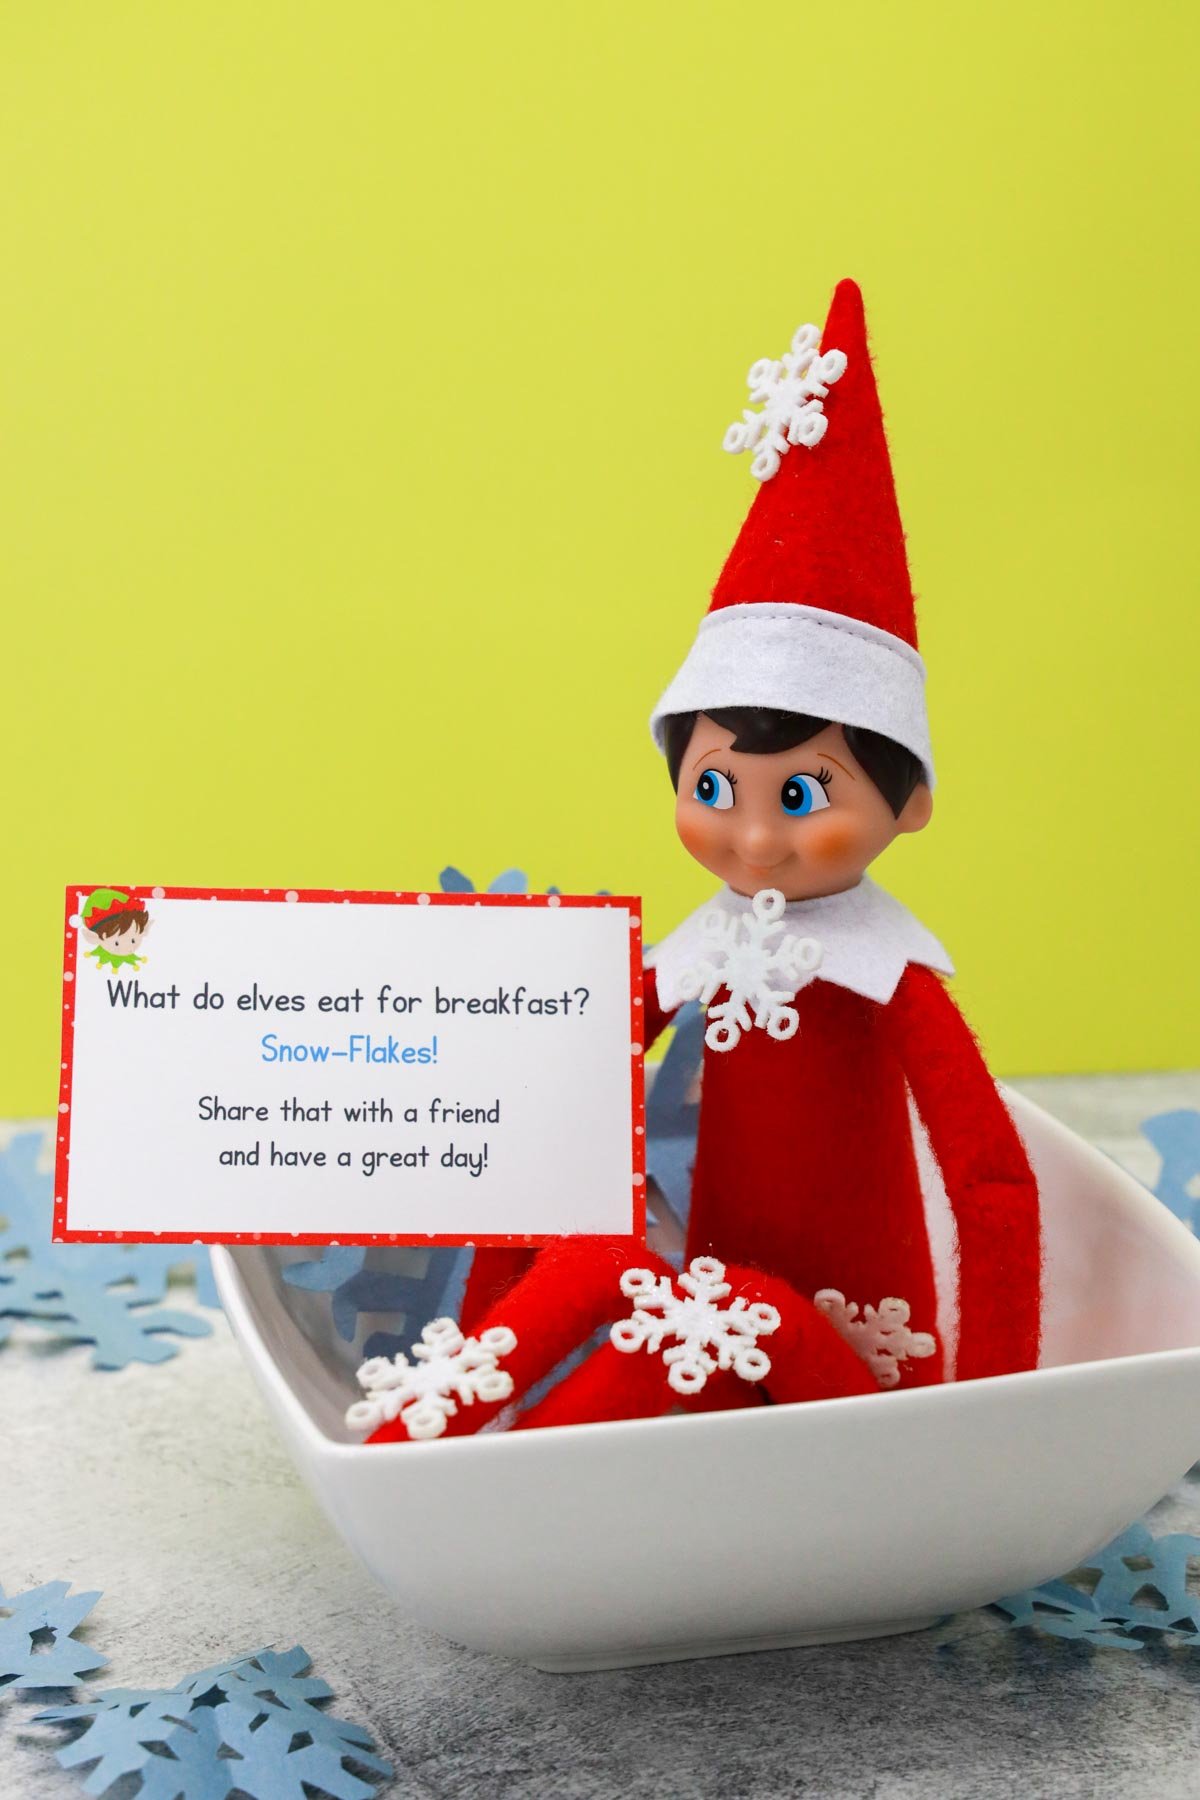 elf on the shelf sitting in a bowl of snowflakes